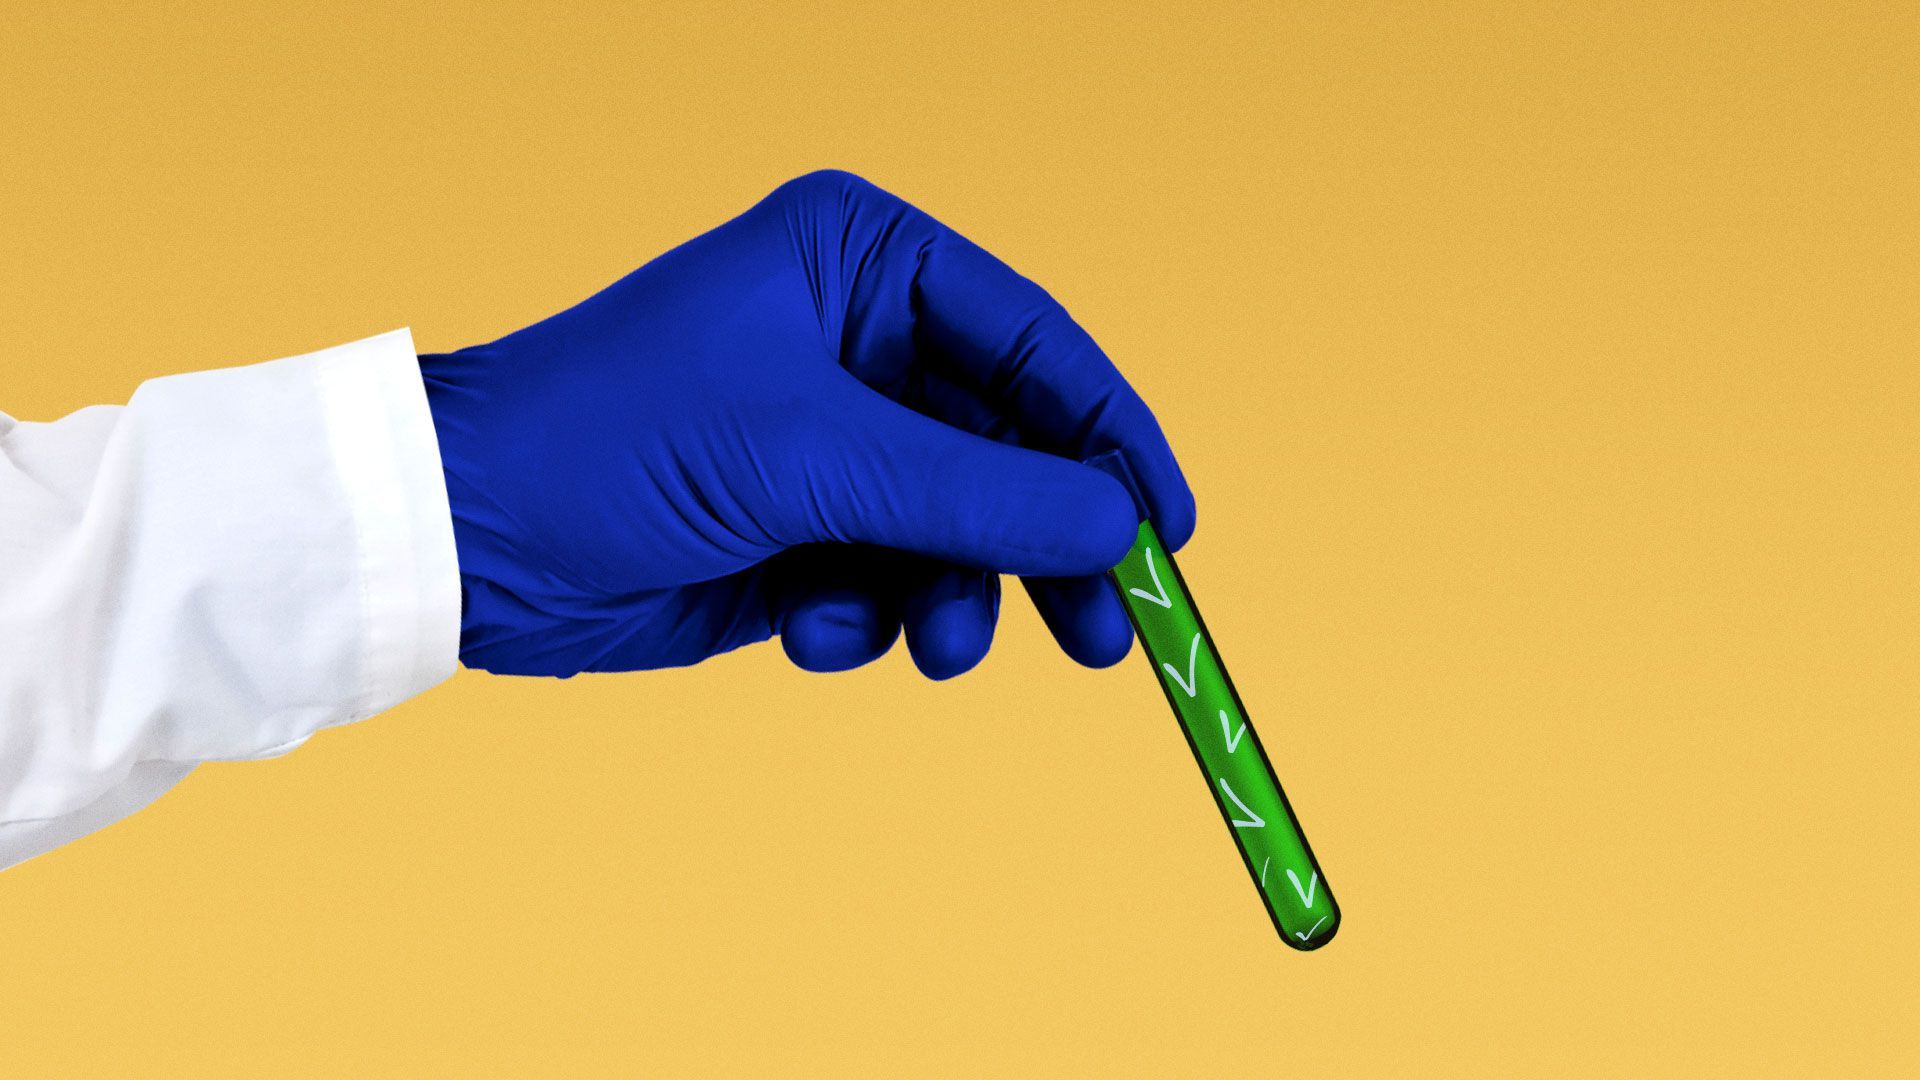 Illustration of a Gloved Hand Holding a Test Tube with Check Marks